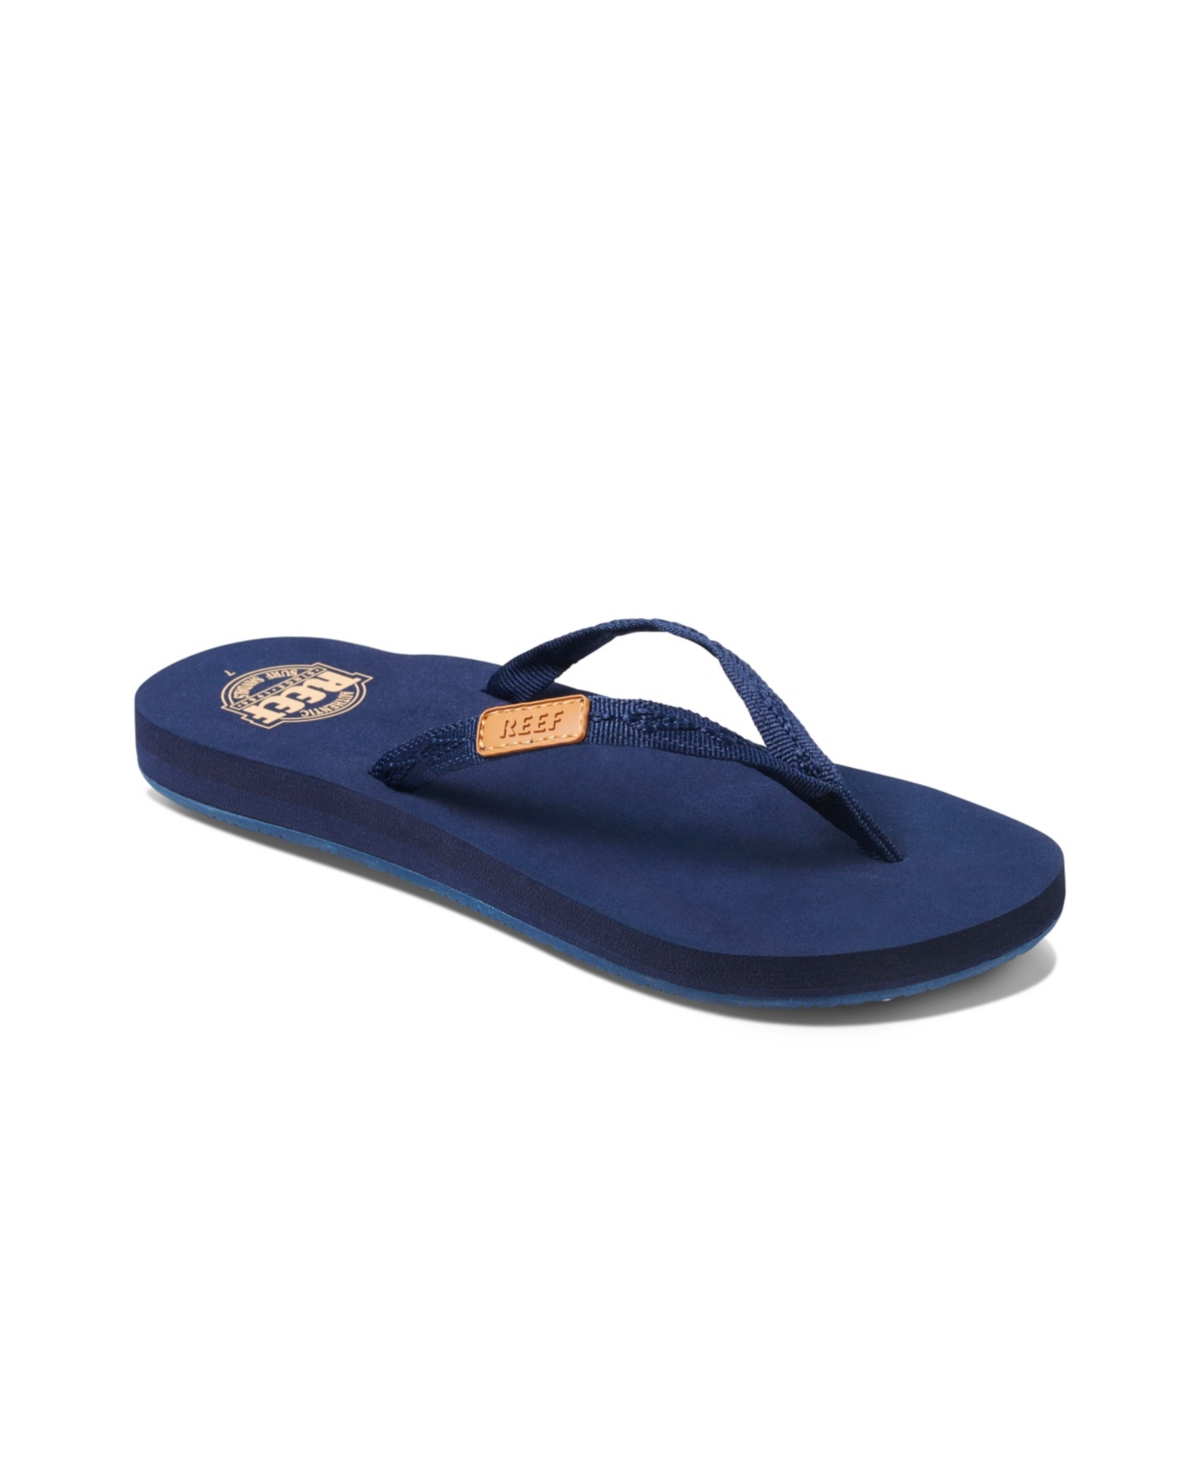 Reef Ginger Thong Sandals In Navy